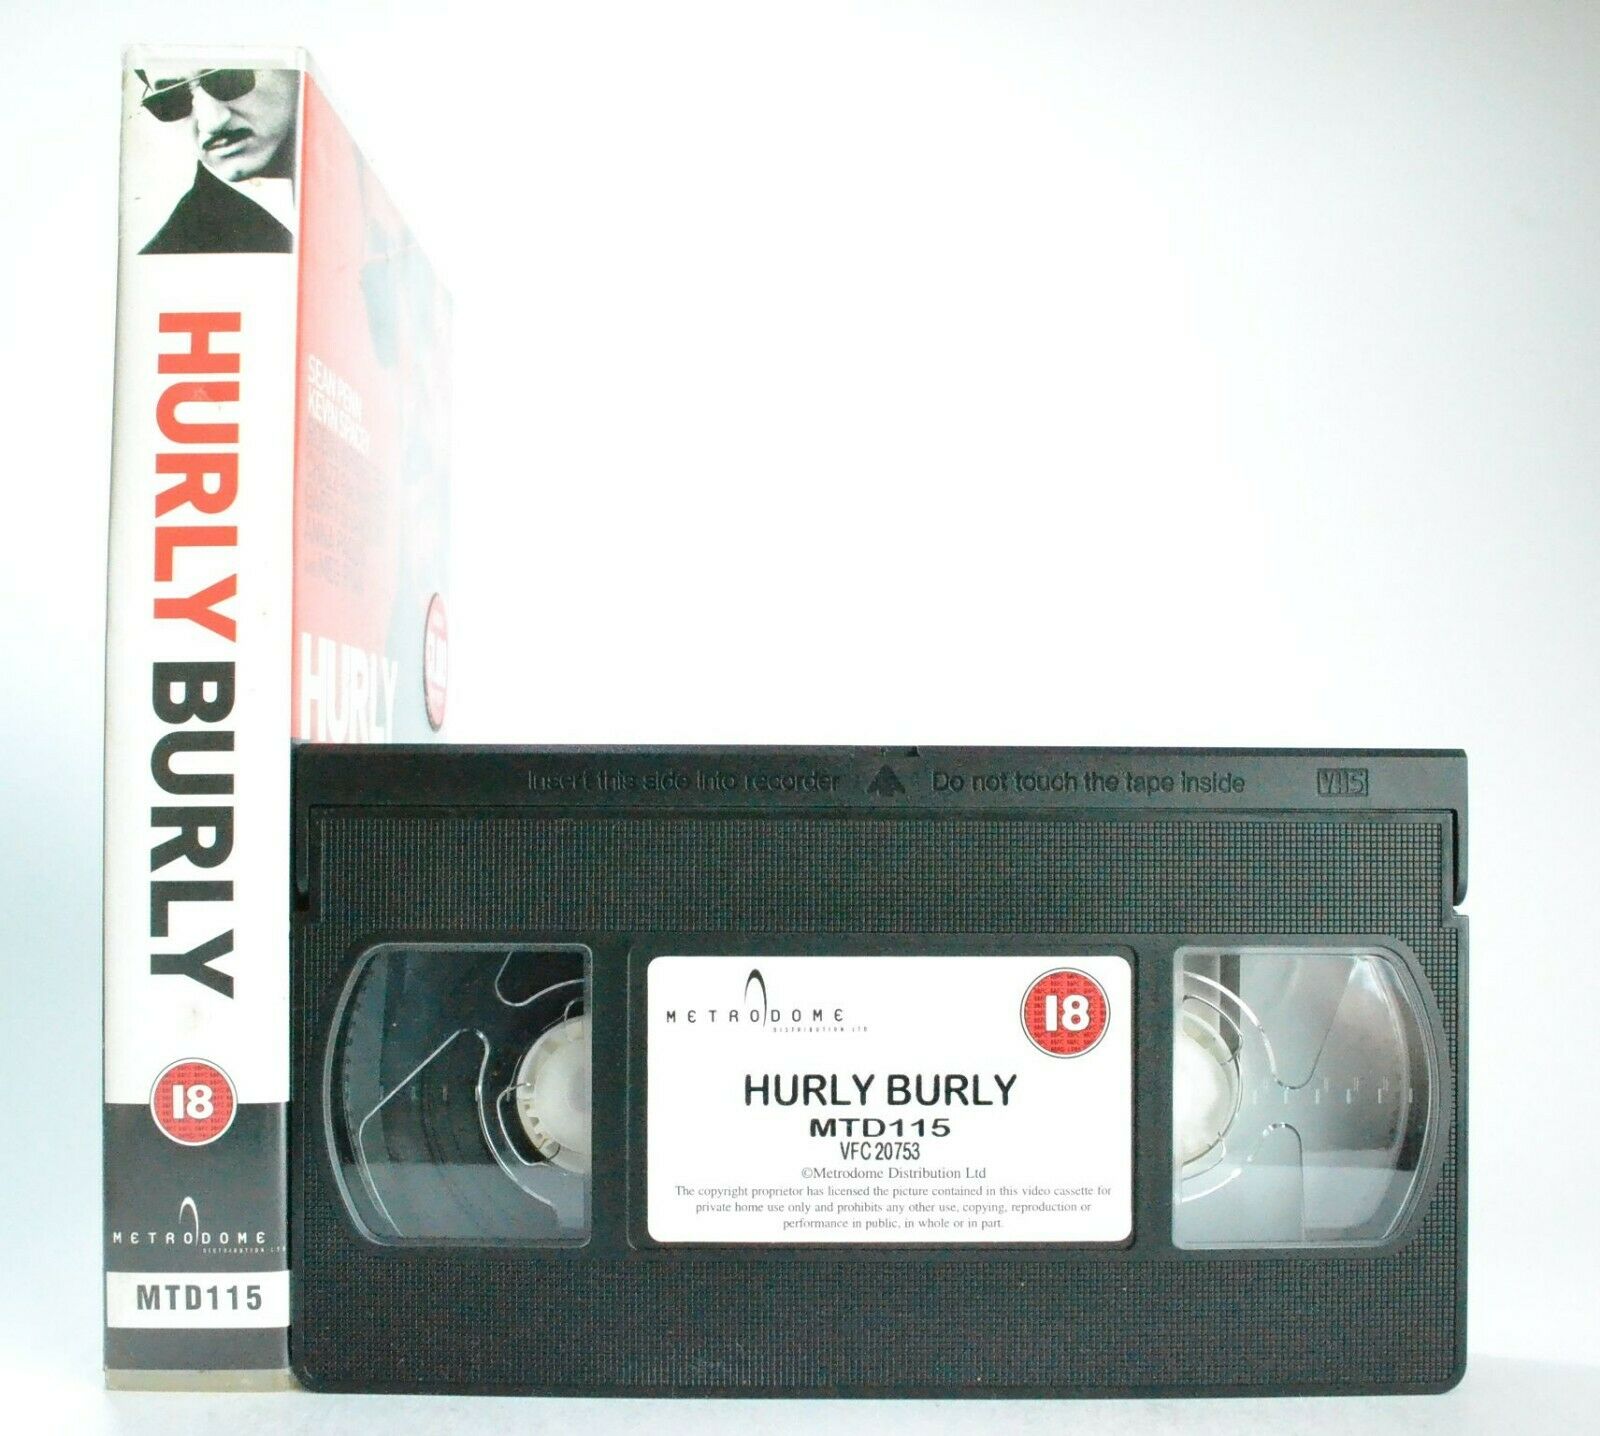 Hurly Burly: Drama (1998) - Large Box - Sex, Drugs And Hedonism - S.Penn - VHS-